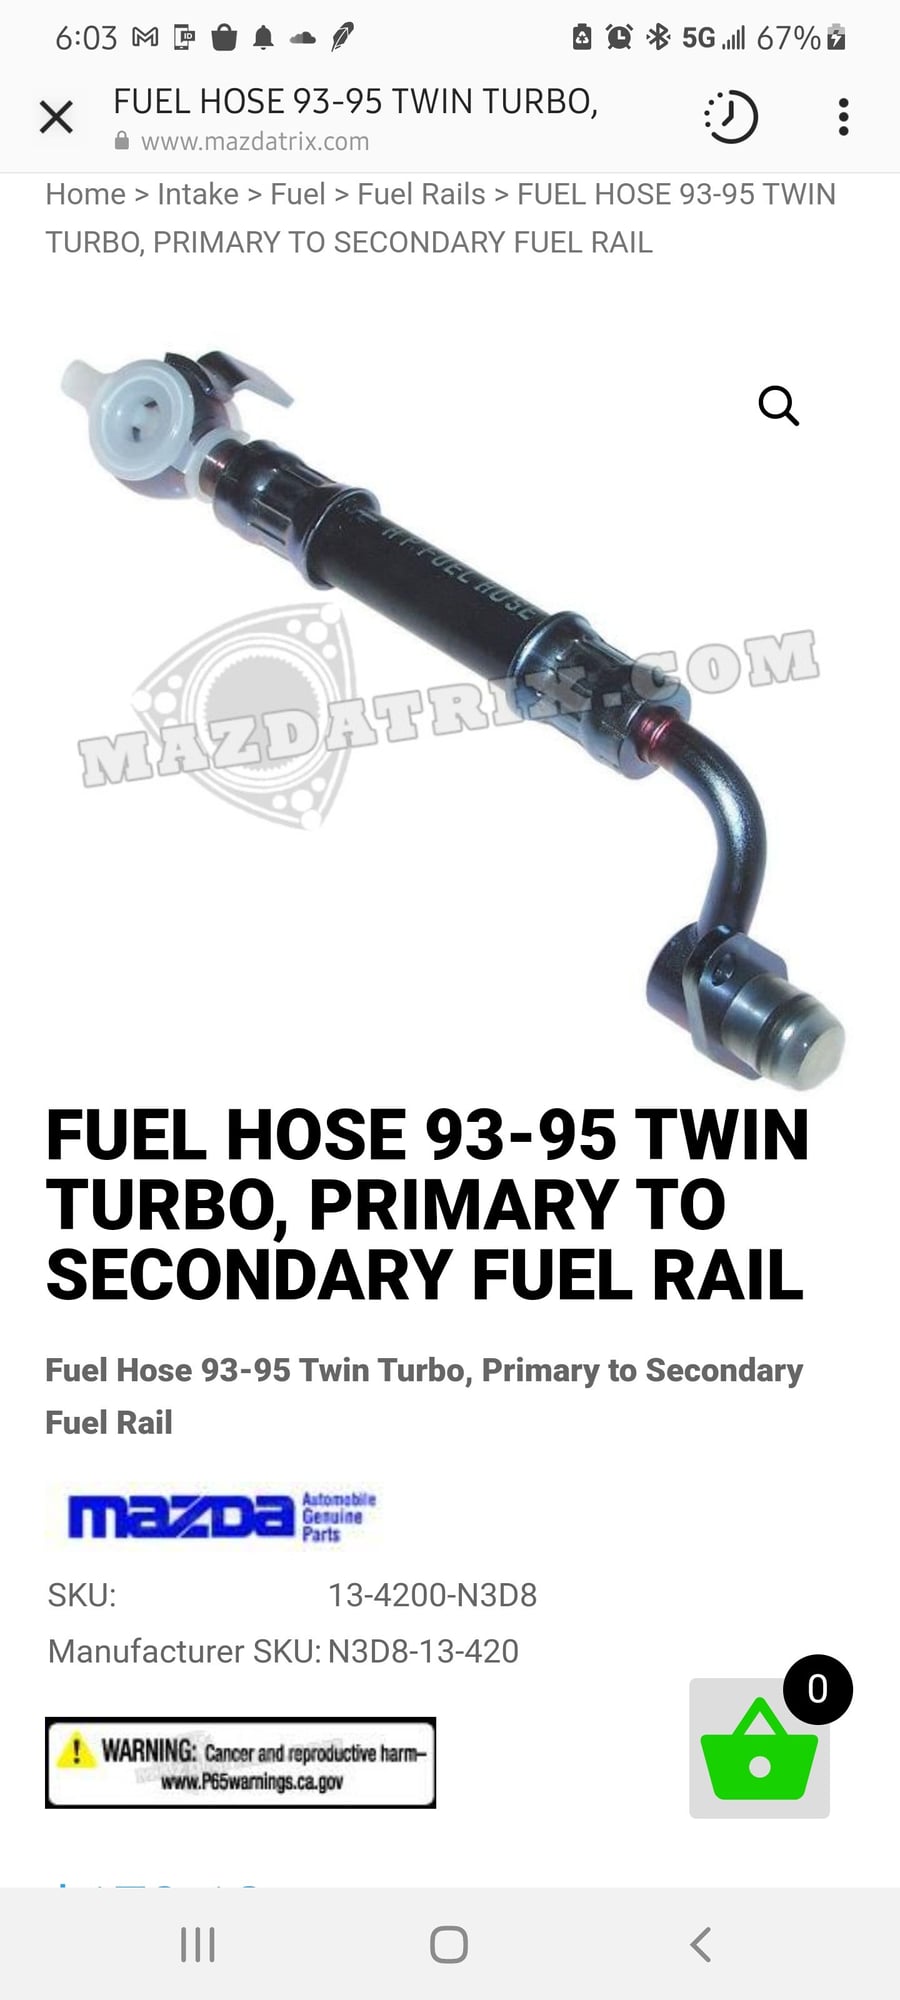 Engine - Intake/Fuel - Rx7  fd primary to secondary fuel rail - New - 1992 to 2002 Mazda RX-7 - Rockaway Park, NY 11694, United States